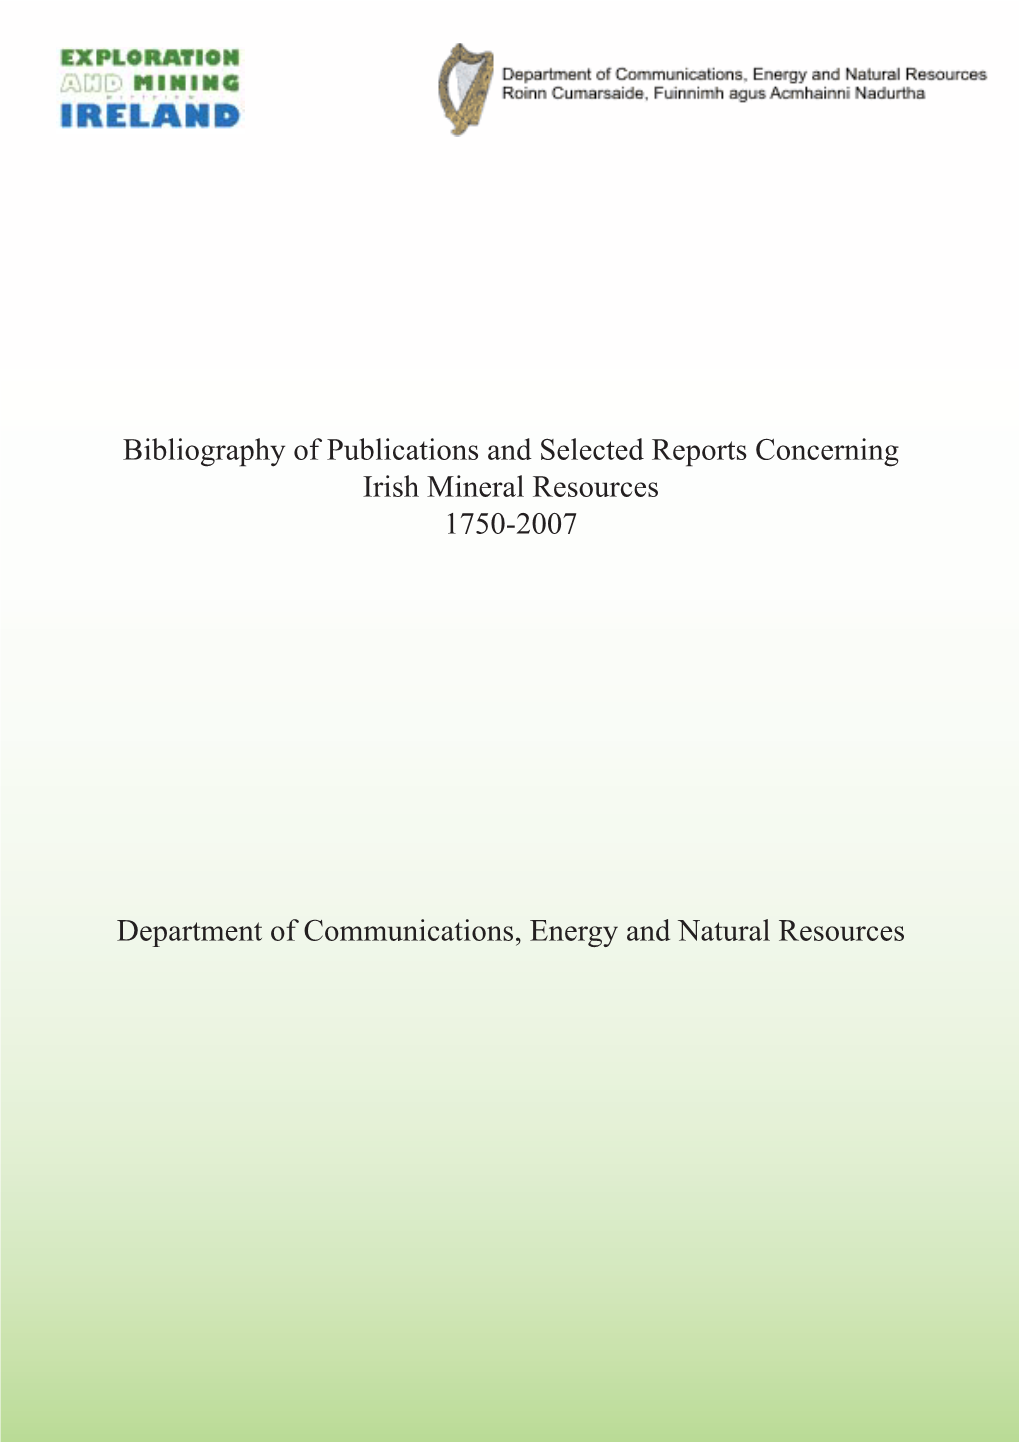 Bibliography of Publications and Selected Reports Concerning Irish Mineral Resources 1750-2007